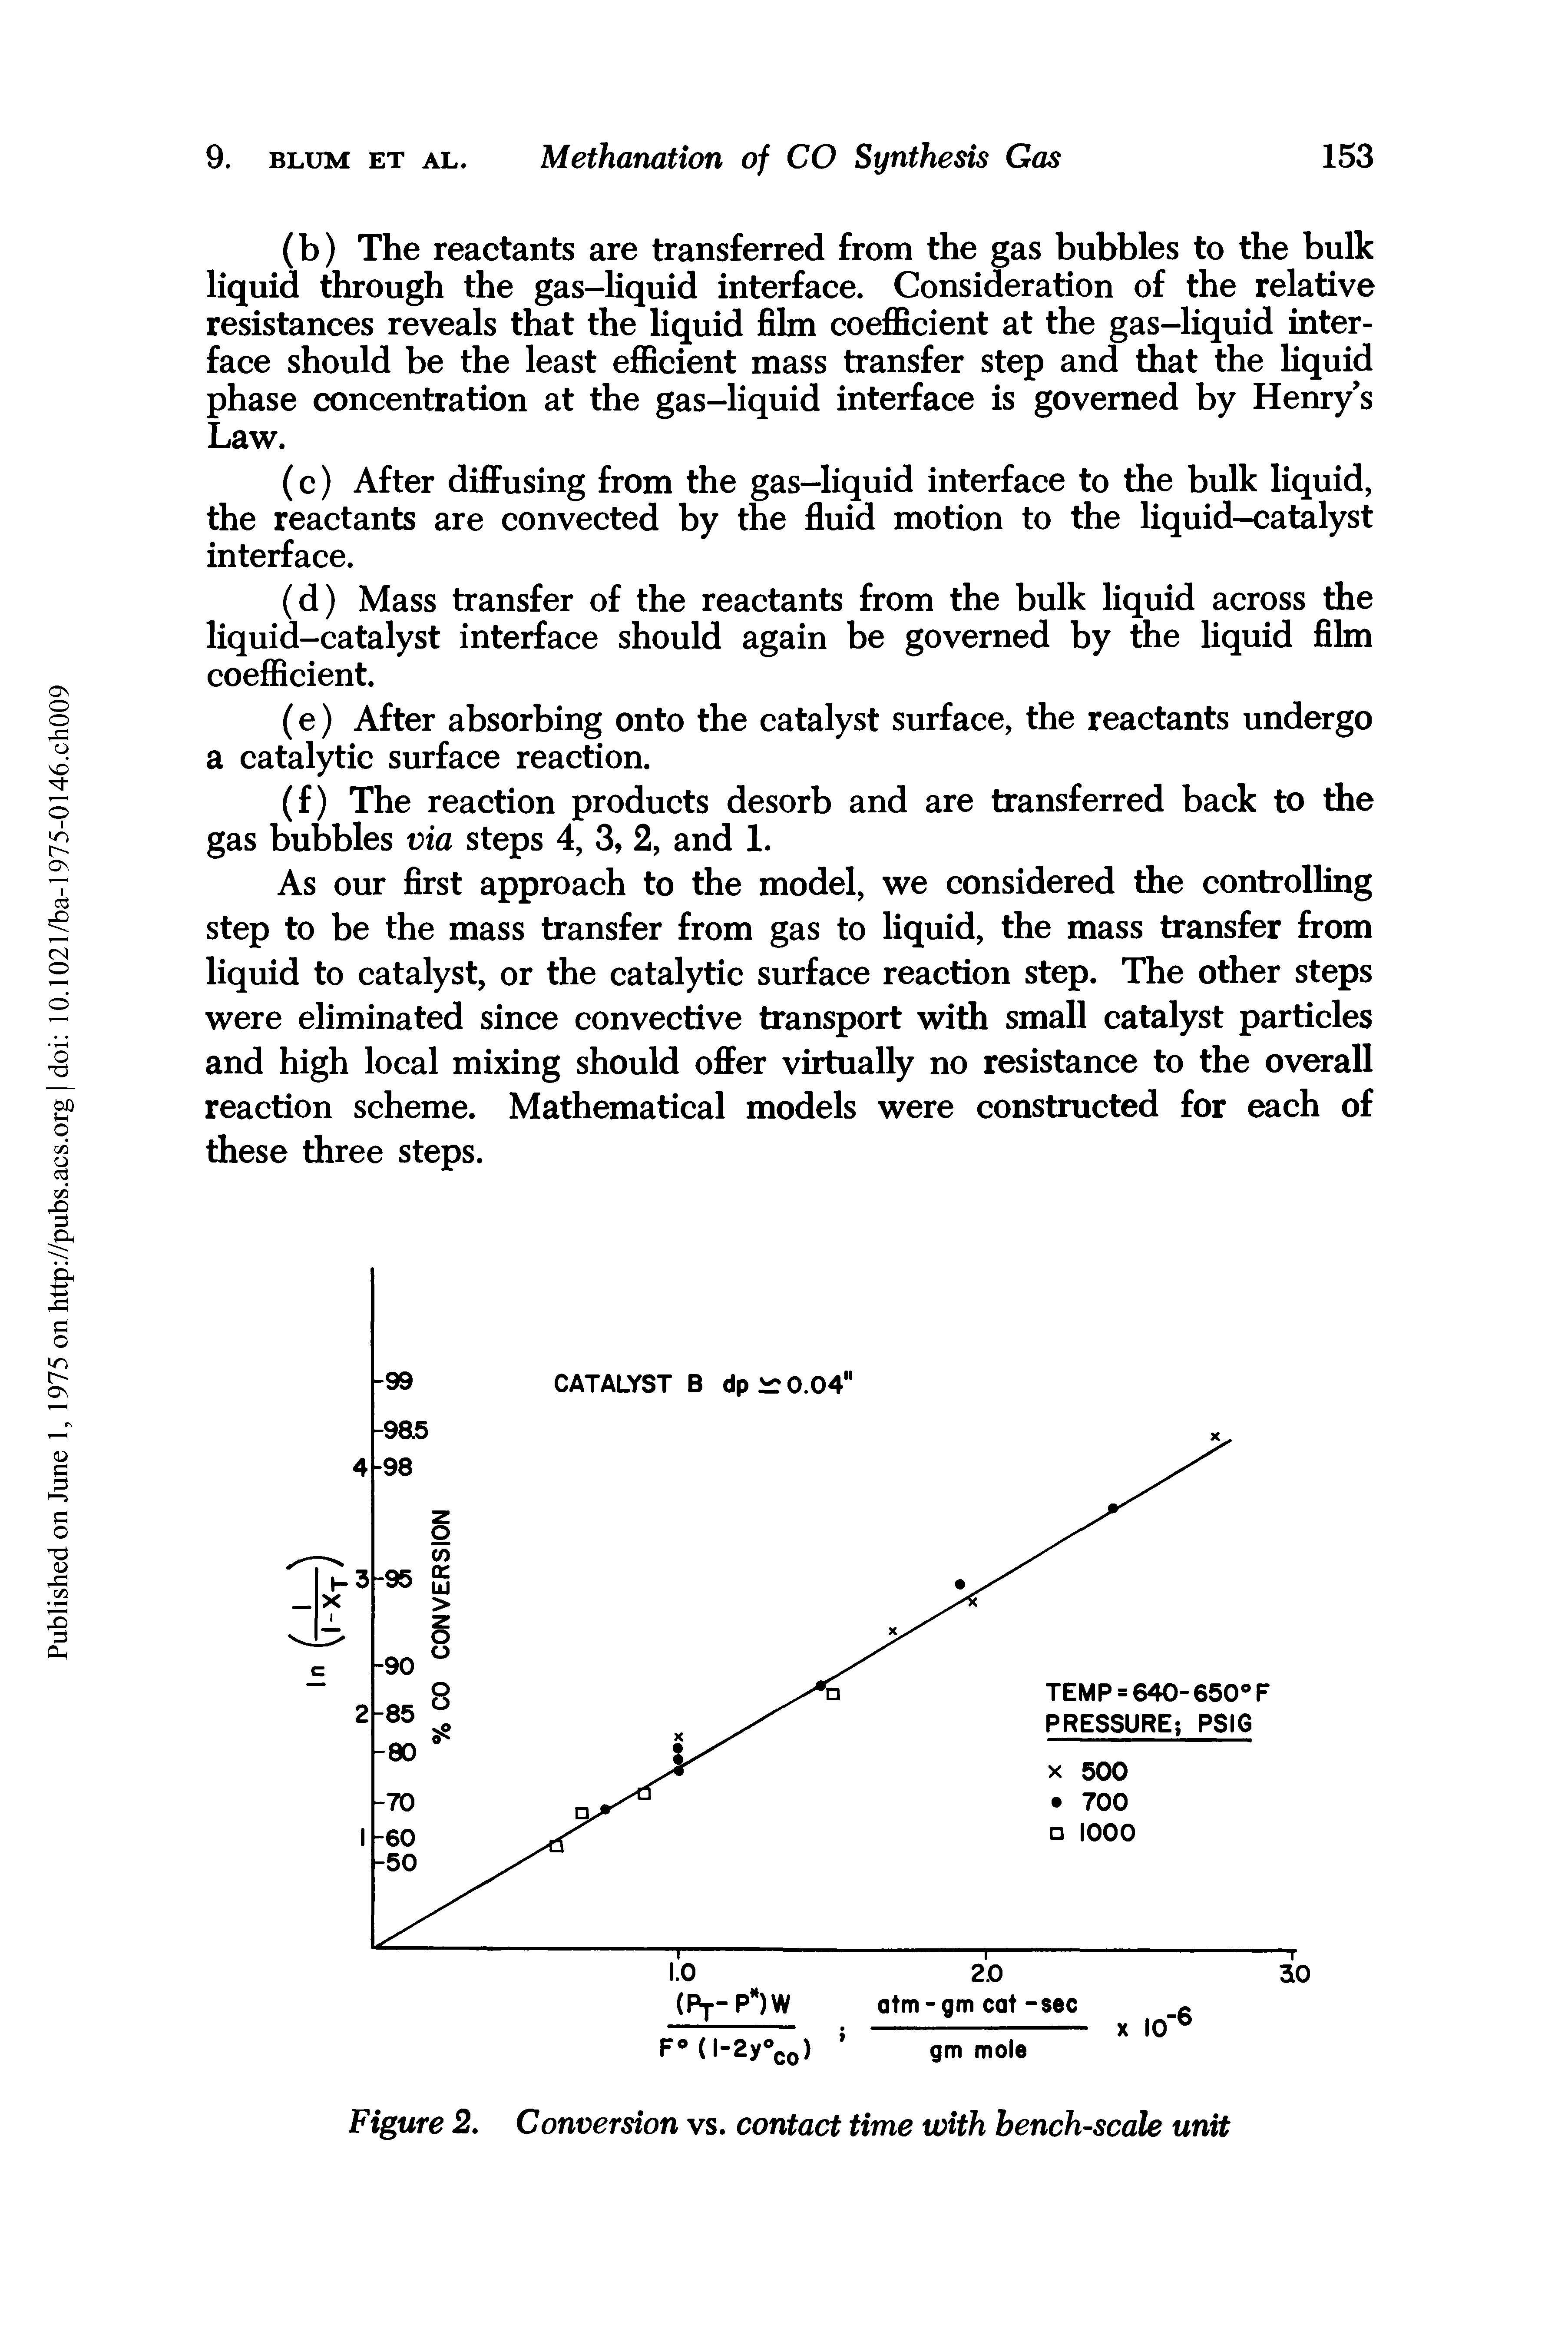 Figure 2. Conversion vs. contact time with bench-scale unit...